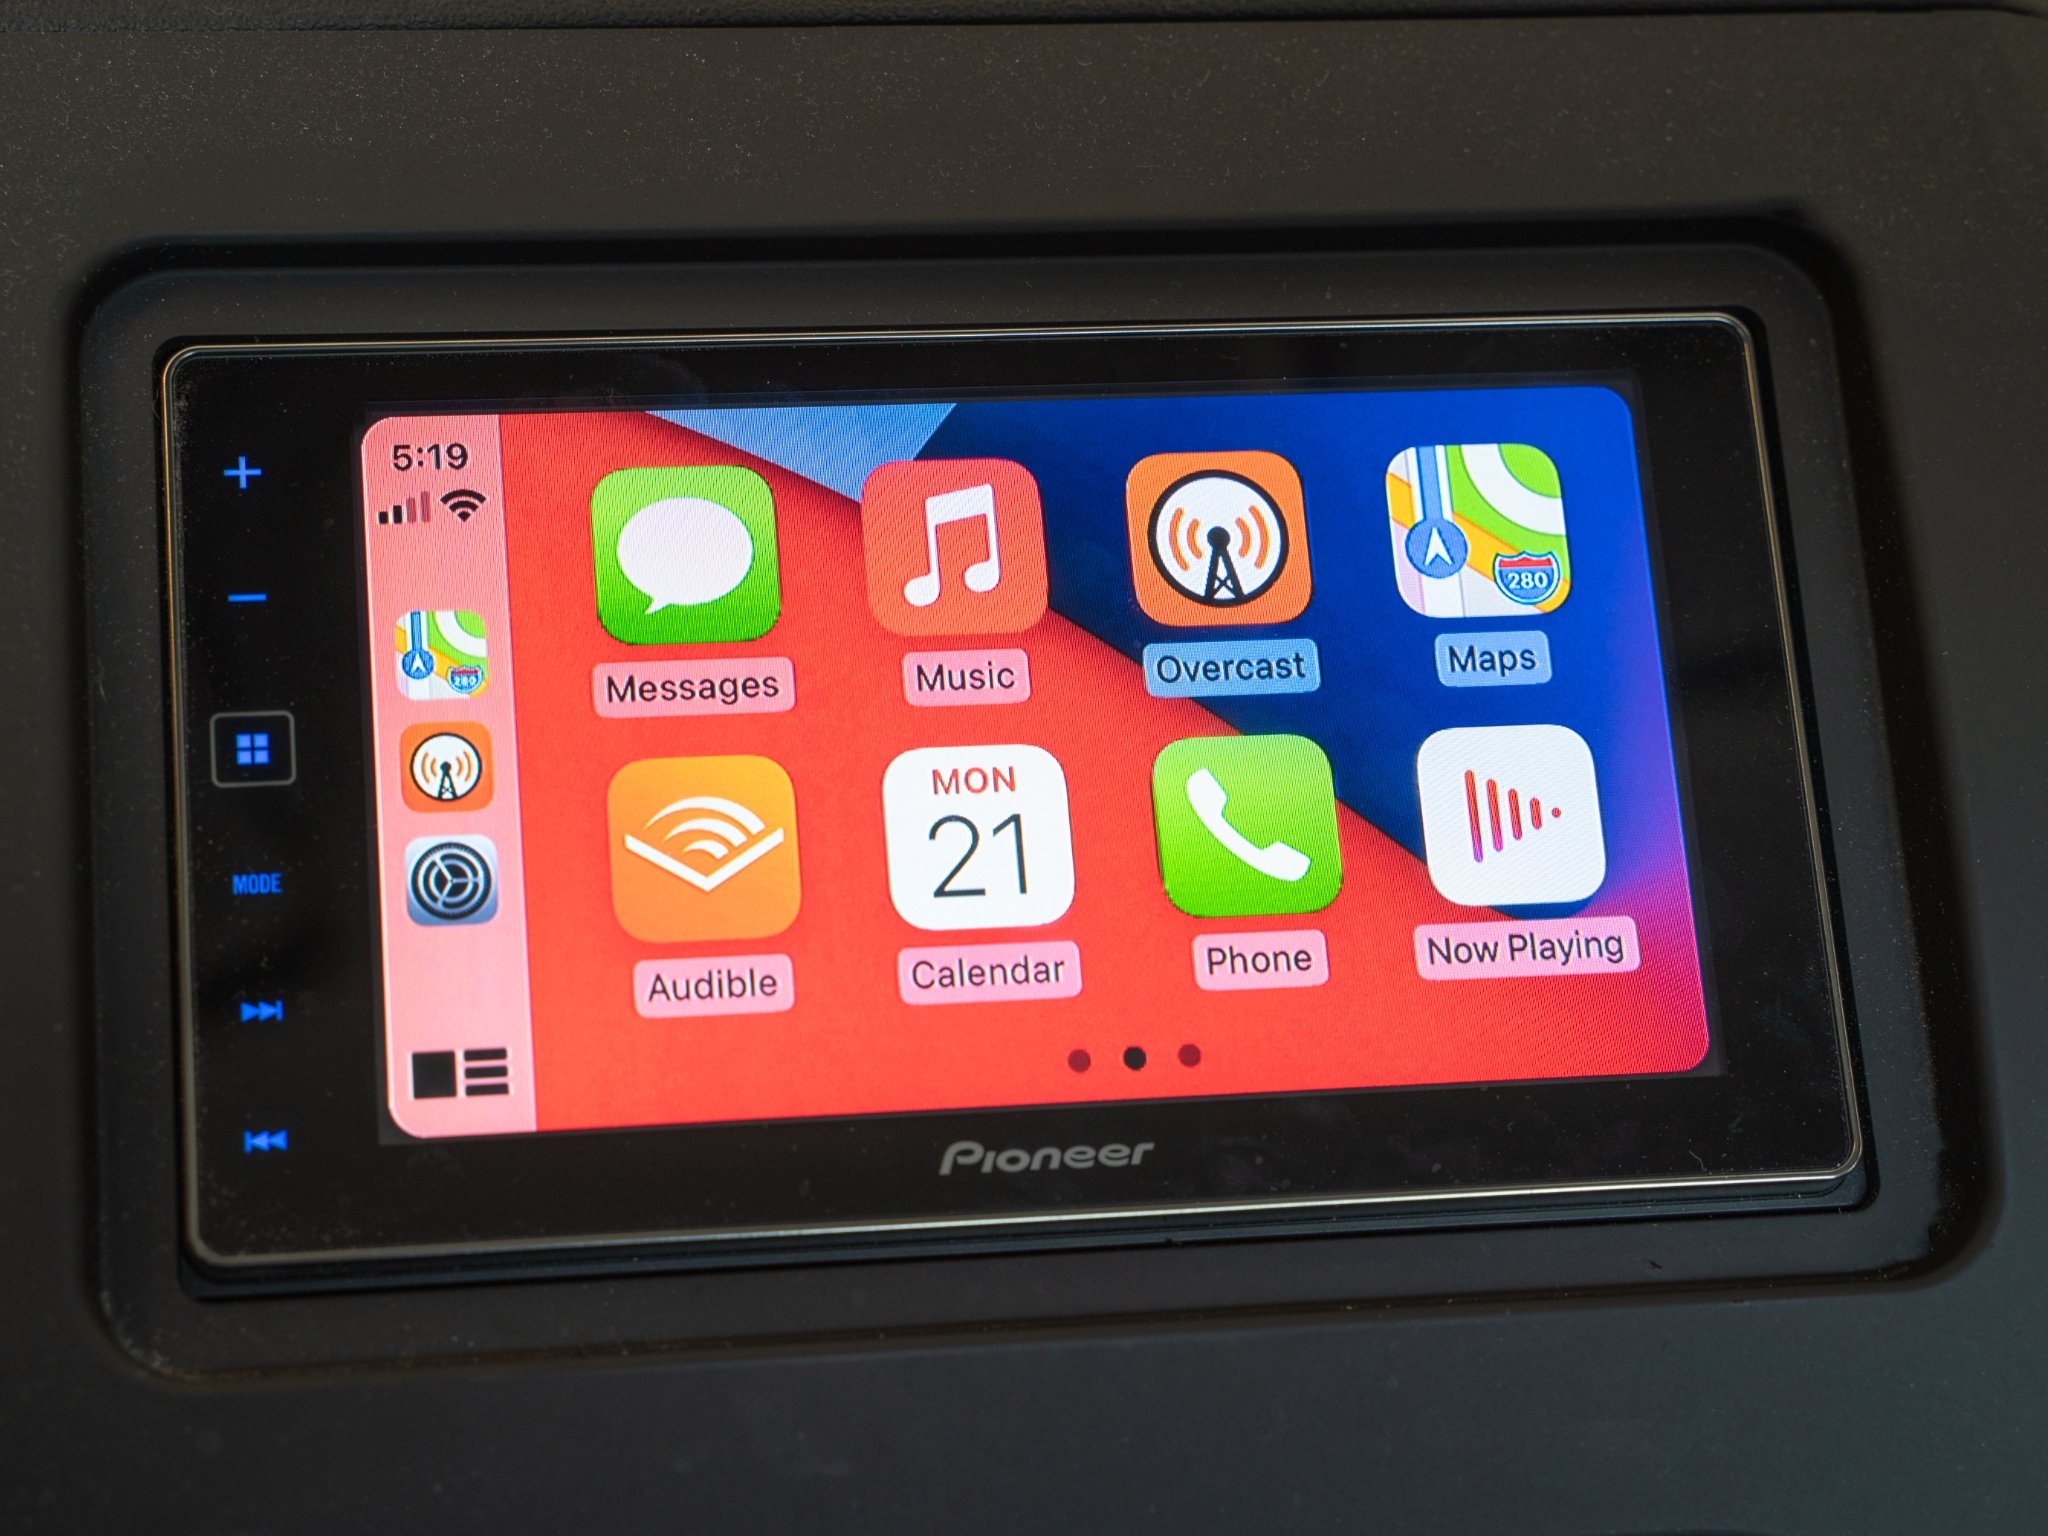 How to set a wallpaper and change appearance for CarPlay